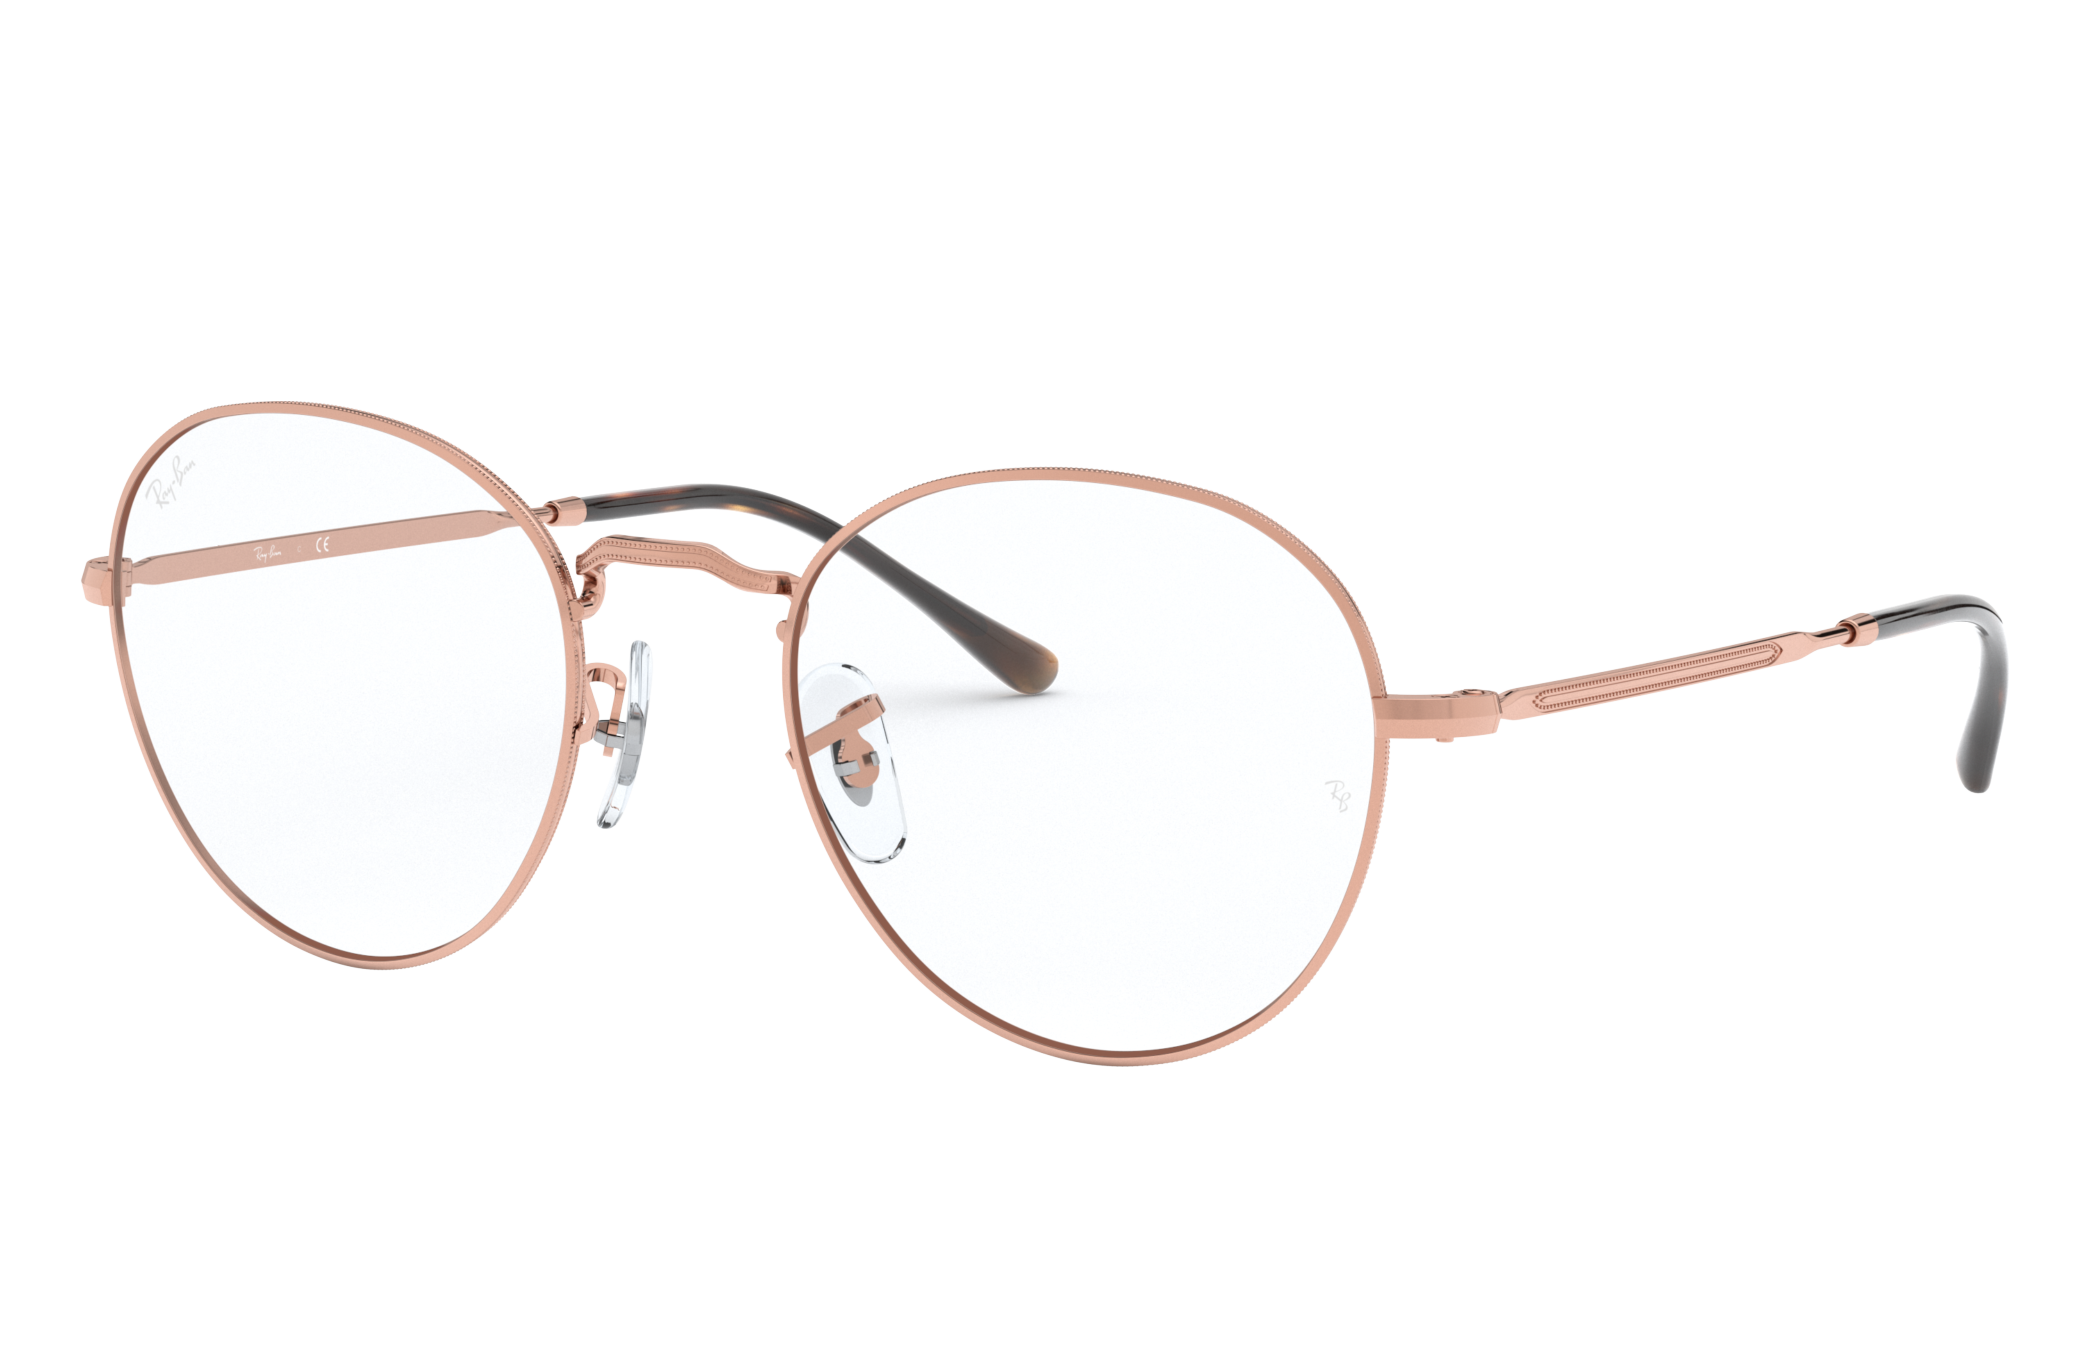 ray ban round metal colors